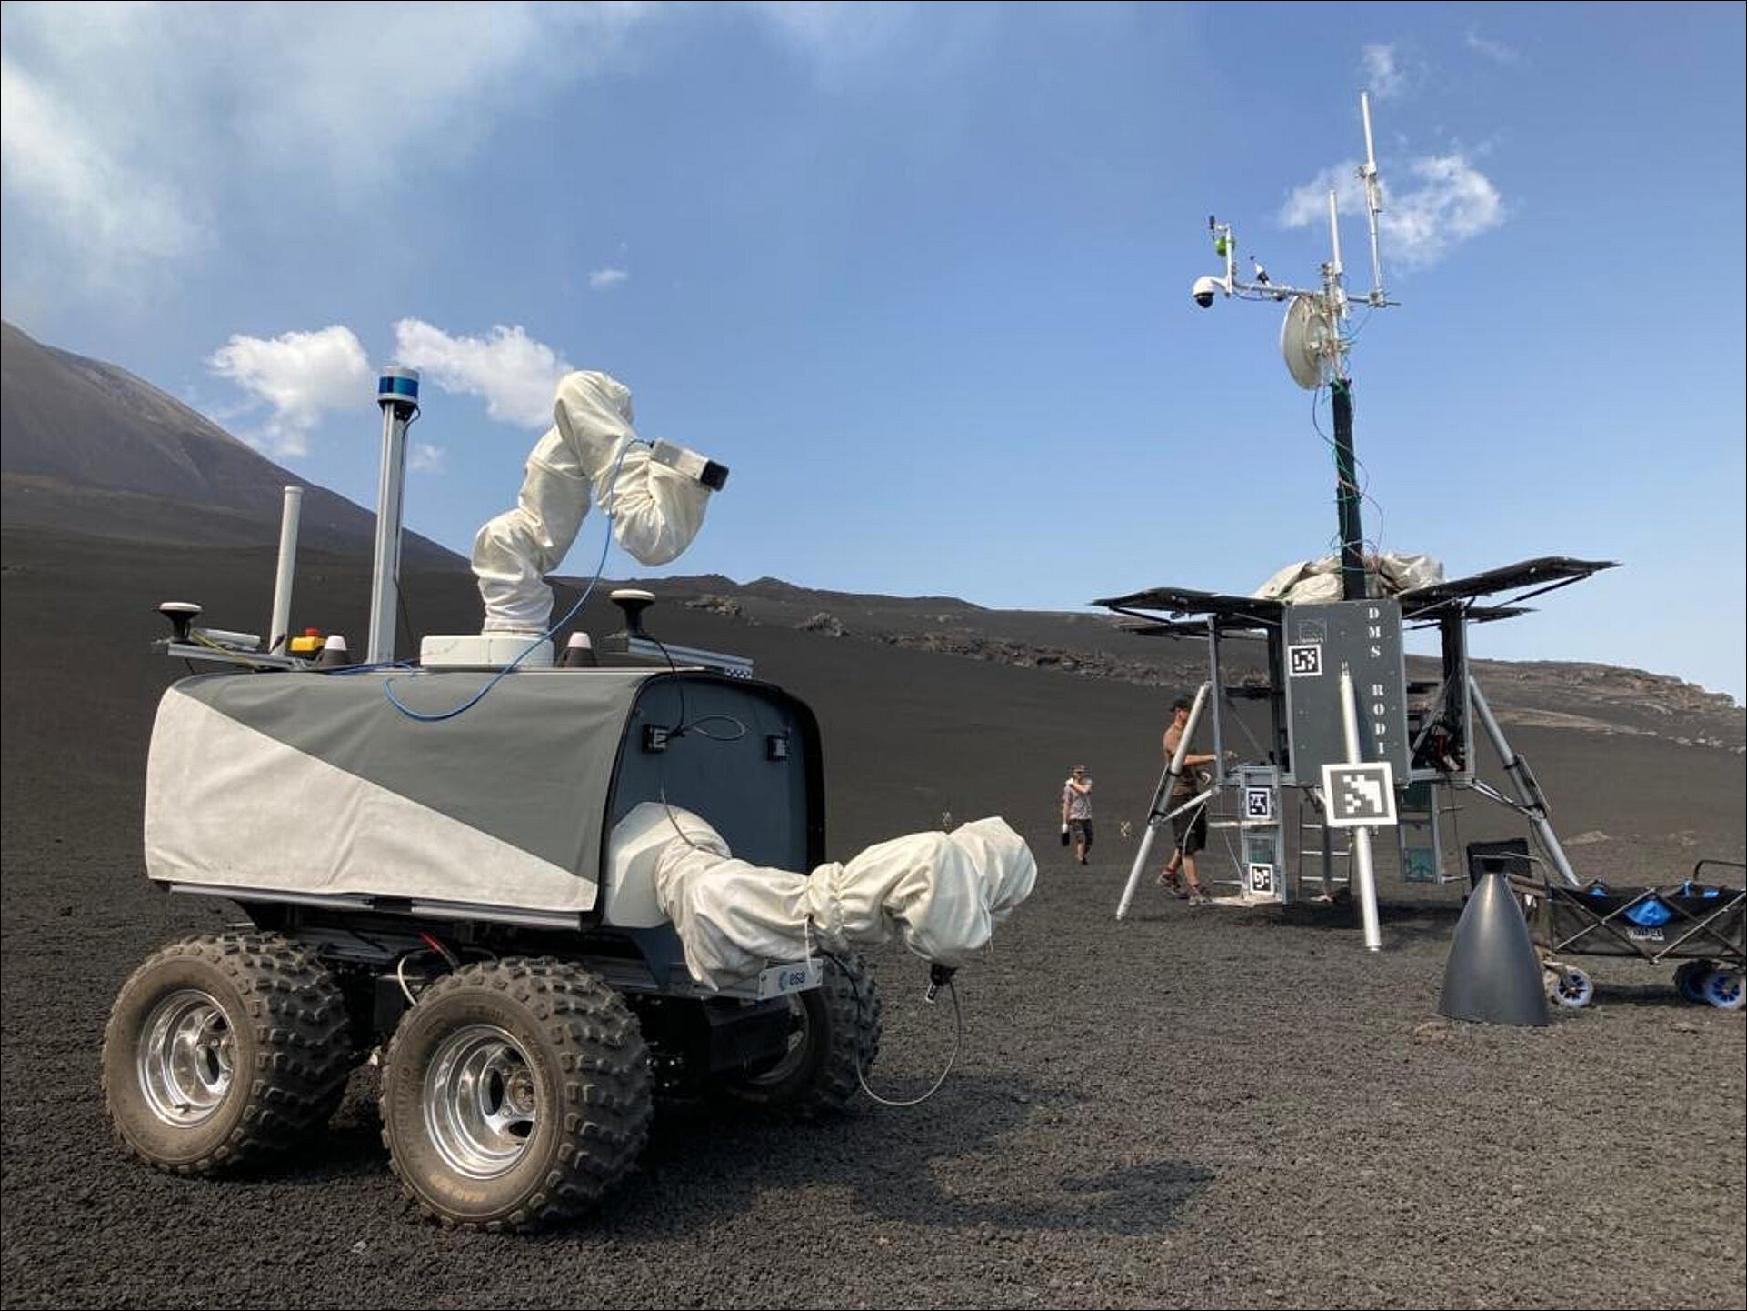 Figure 2: During the Analog-1 test campaign on Mount Etna, the Interact rover chose rock samples and brought them to DLR's RODIN lunar lander. This activity was overseen from 23 km away by ESA astronaut Thomas Reiter (image credit: ESA)